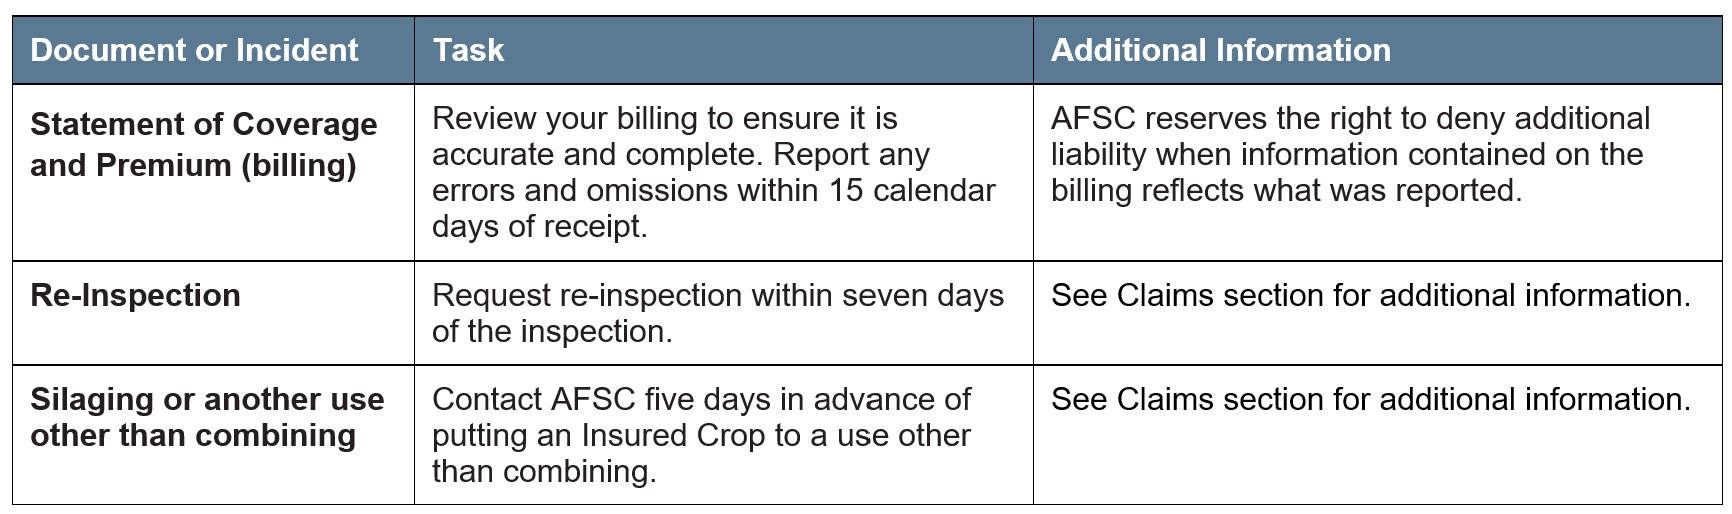 Cereal and Oilseeds Article 4 Other Deadlines. Call AFSC for details